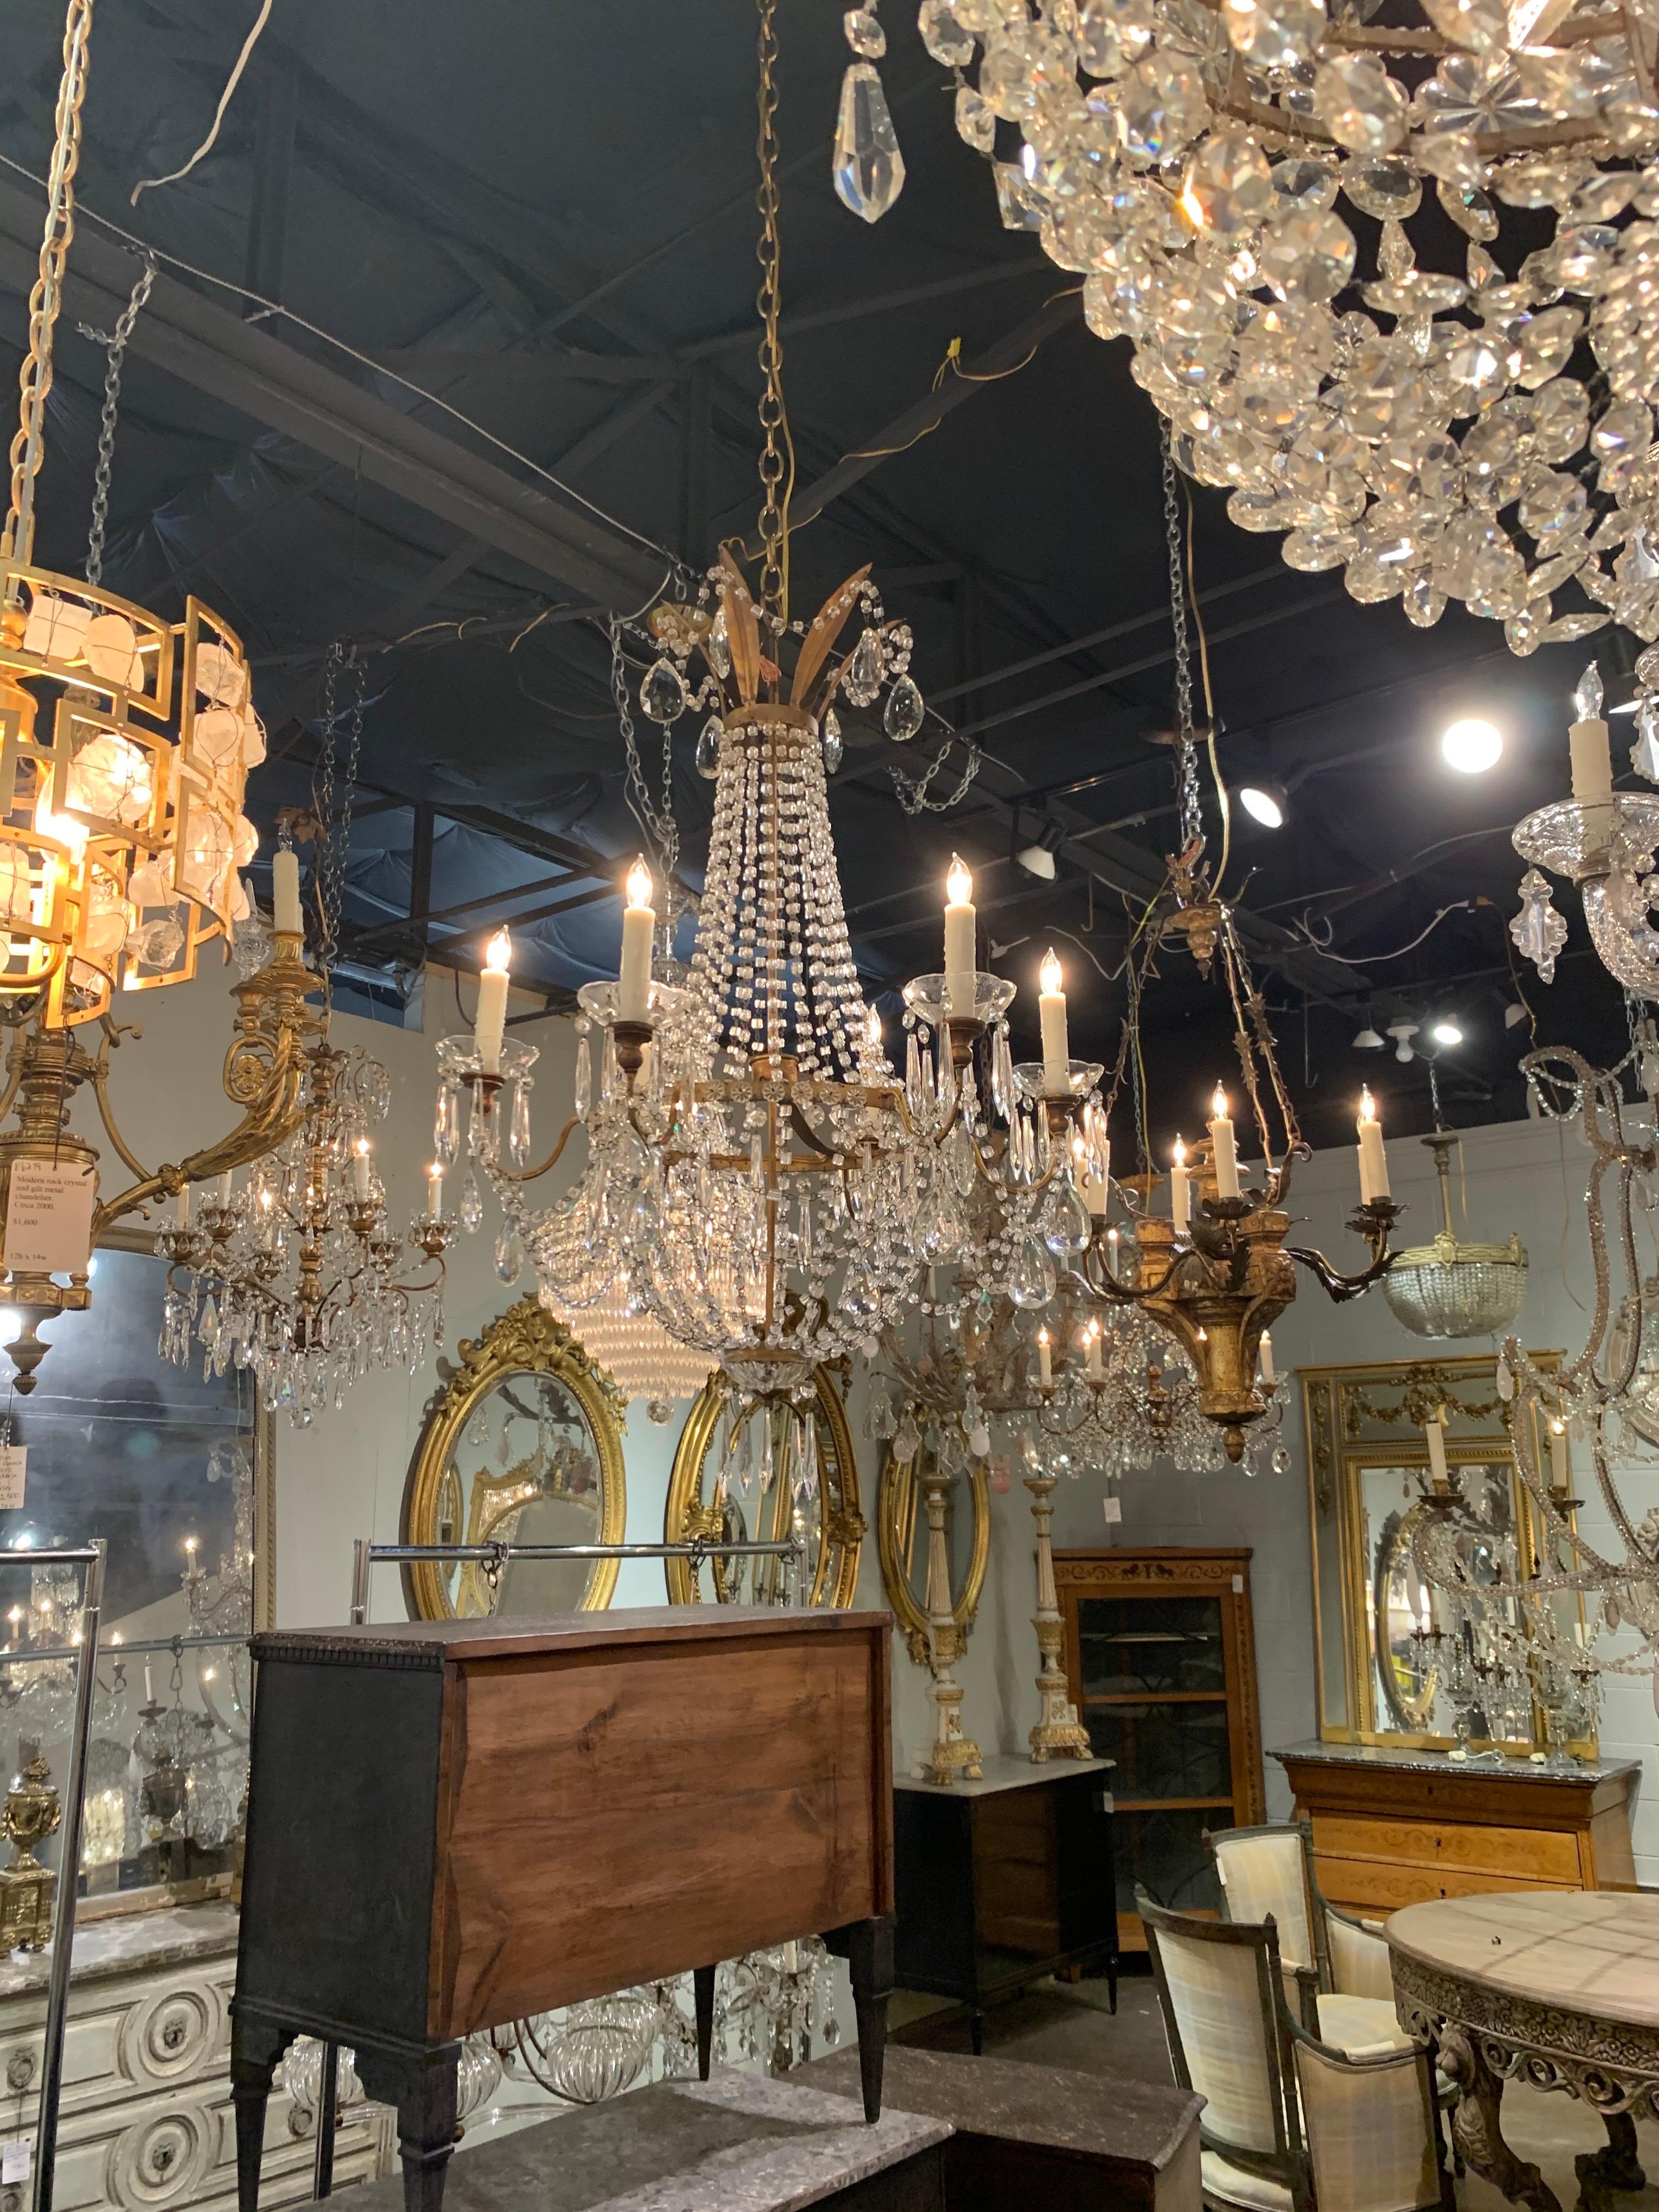 Stunning 19th century Italian Empire style gilt metal and crystal chandelier with 6 lights. Beautiful basket shape with gorgeous crystals. Creates an elegant image!